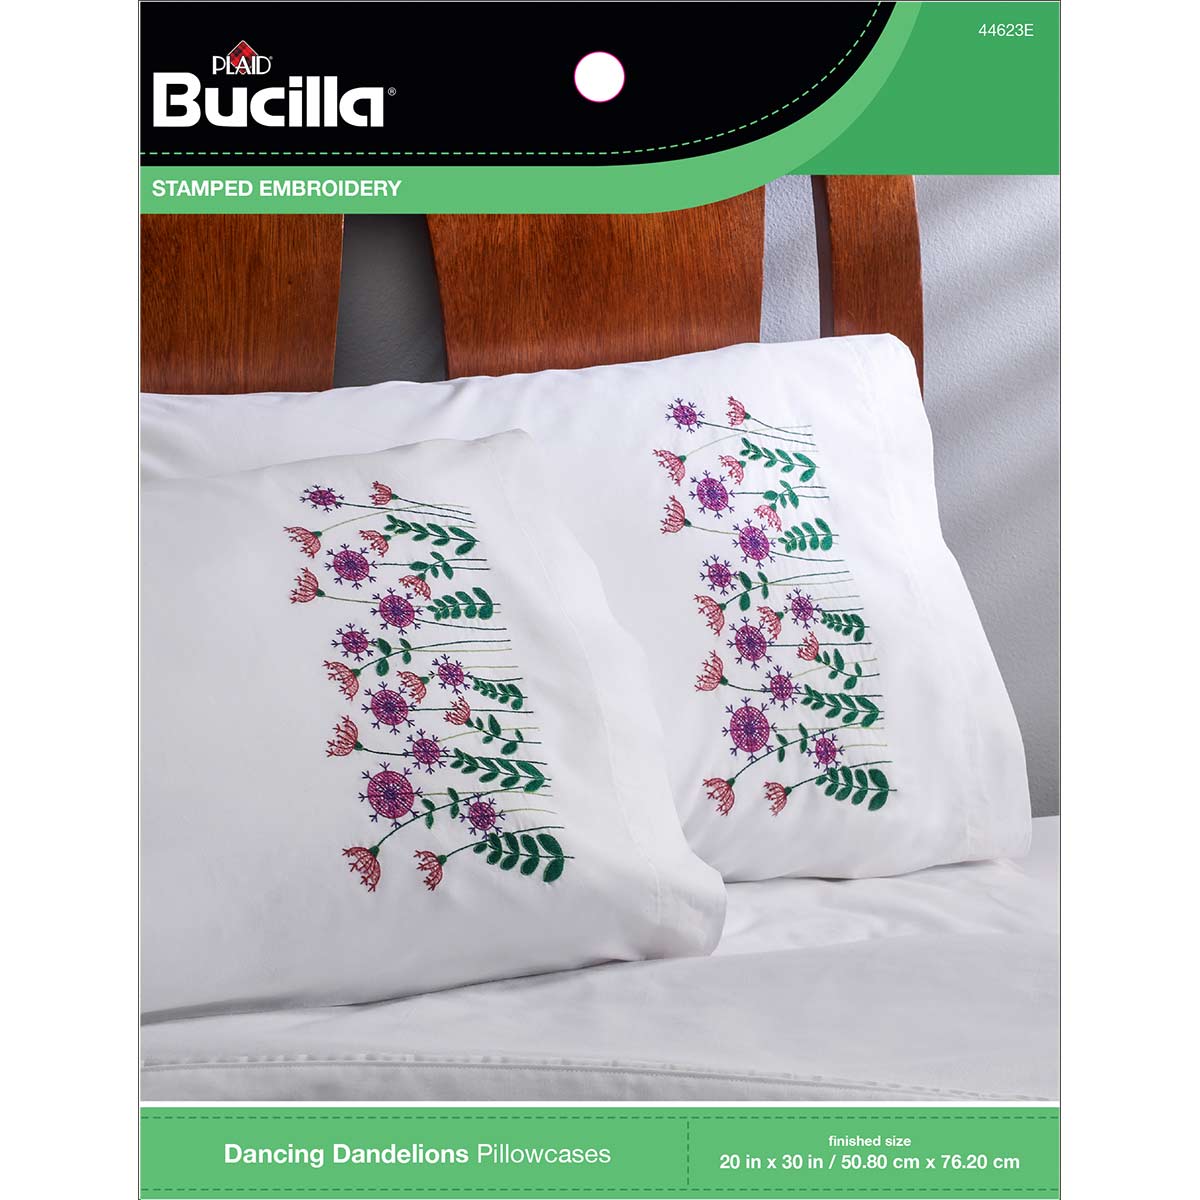 Bucilla ® Stamped Cross Stitch & Embroidery - Pillowcase Pairs - Dancing Dandelions - 44623E